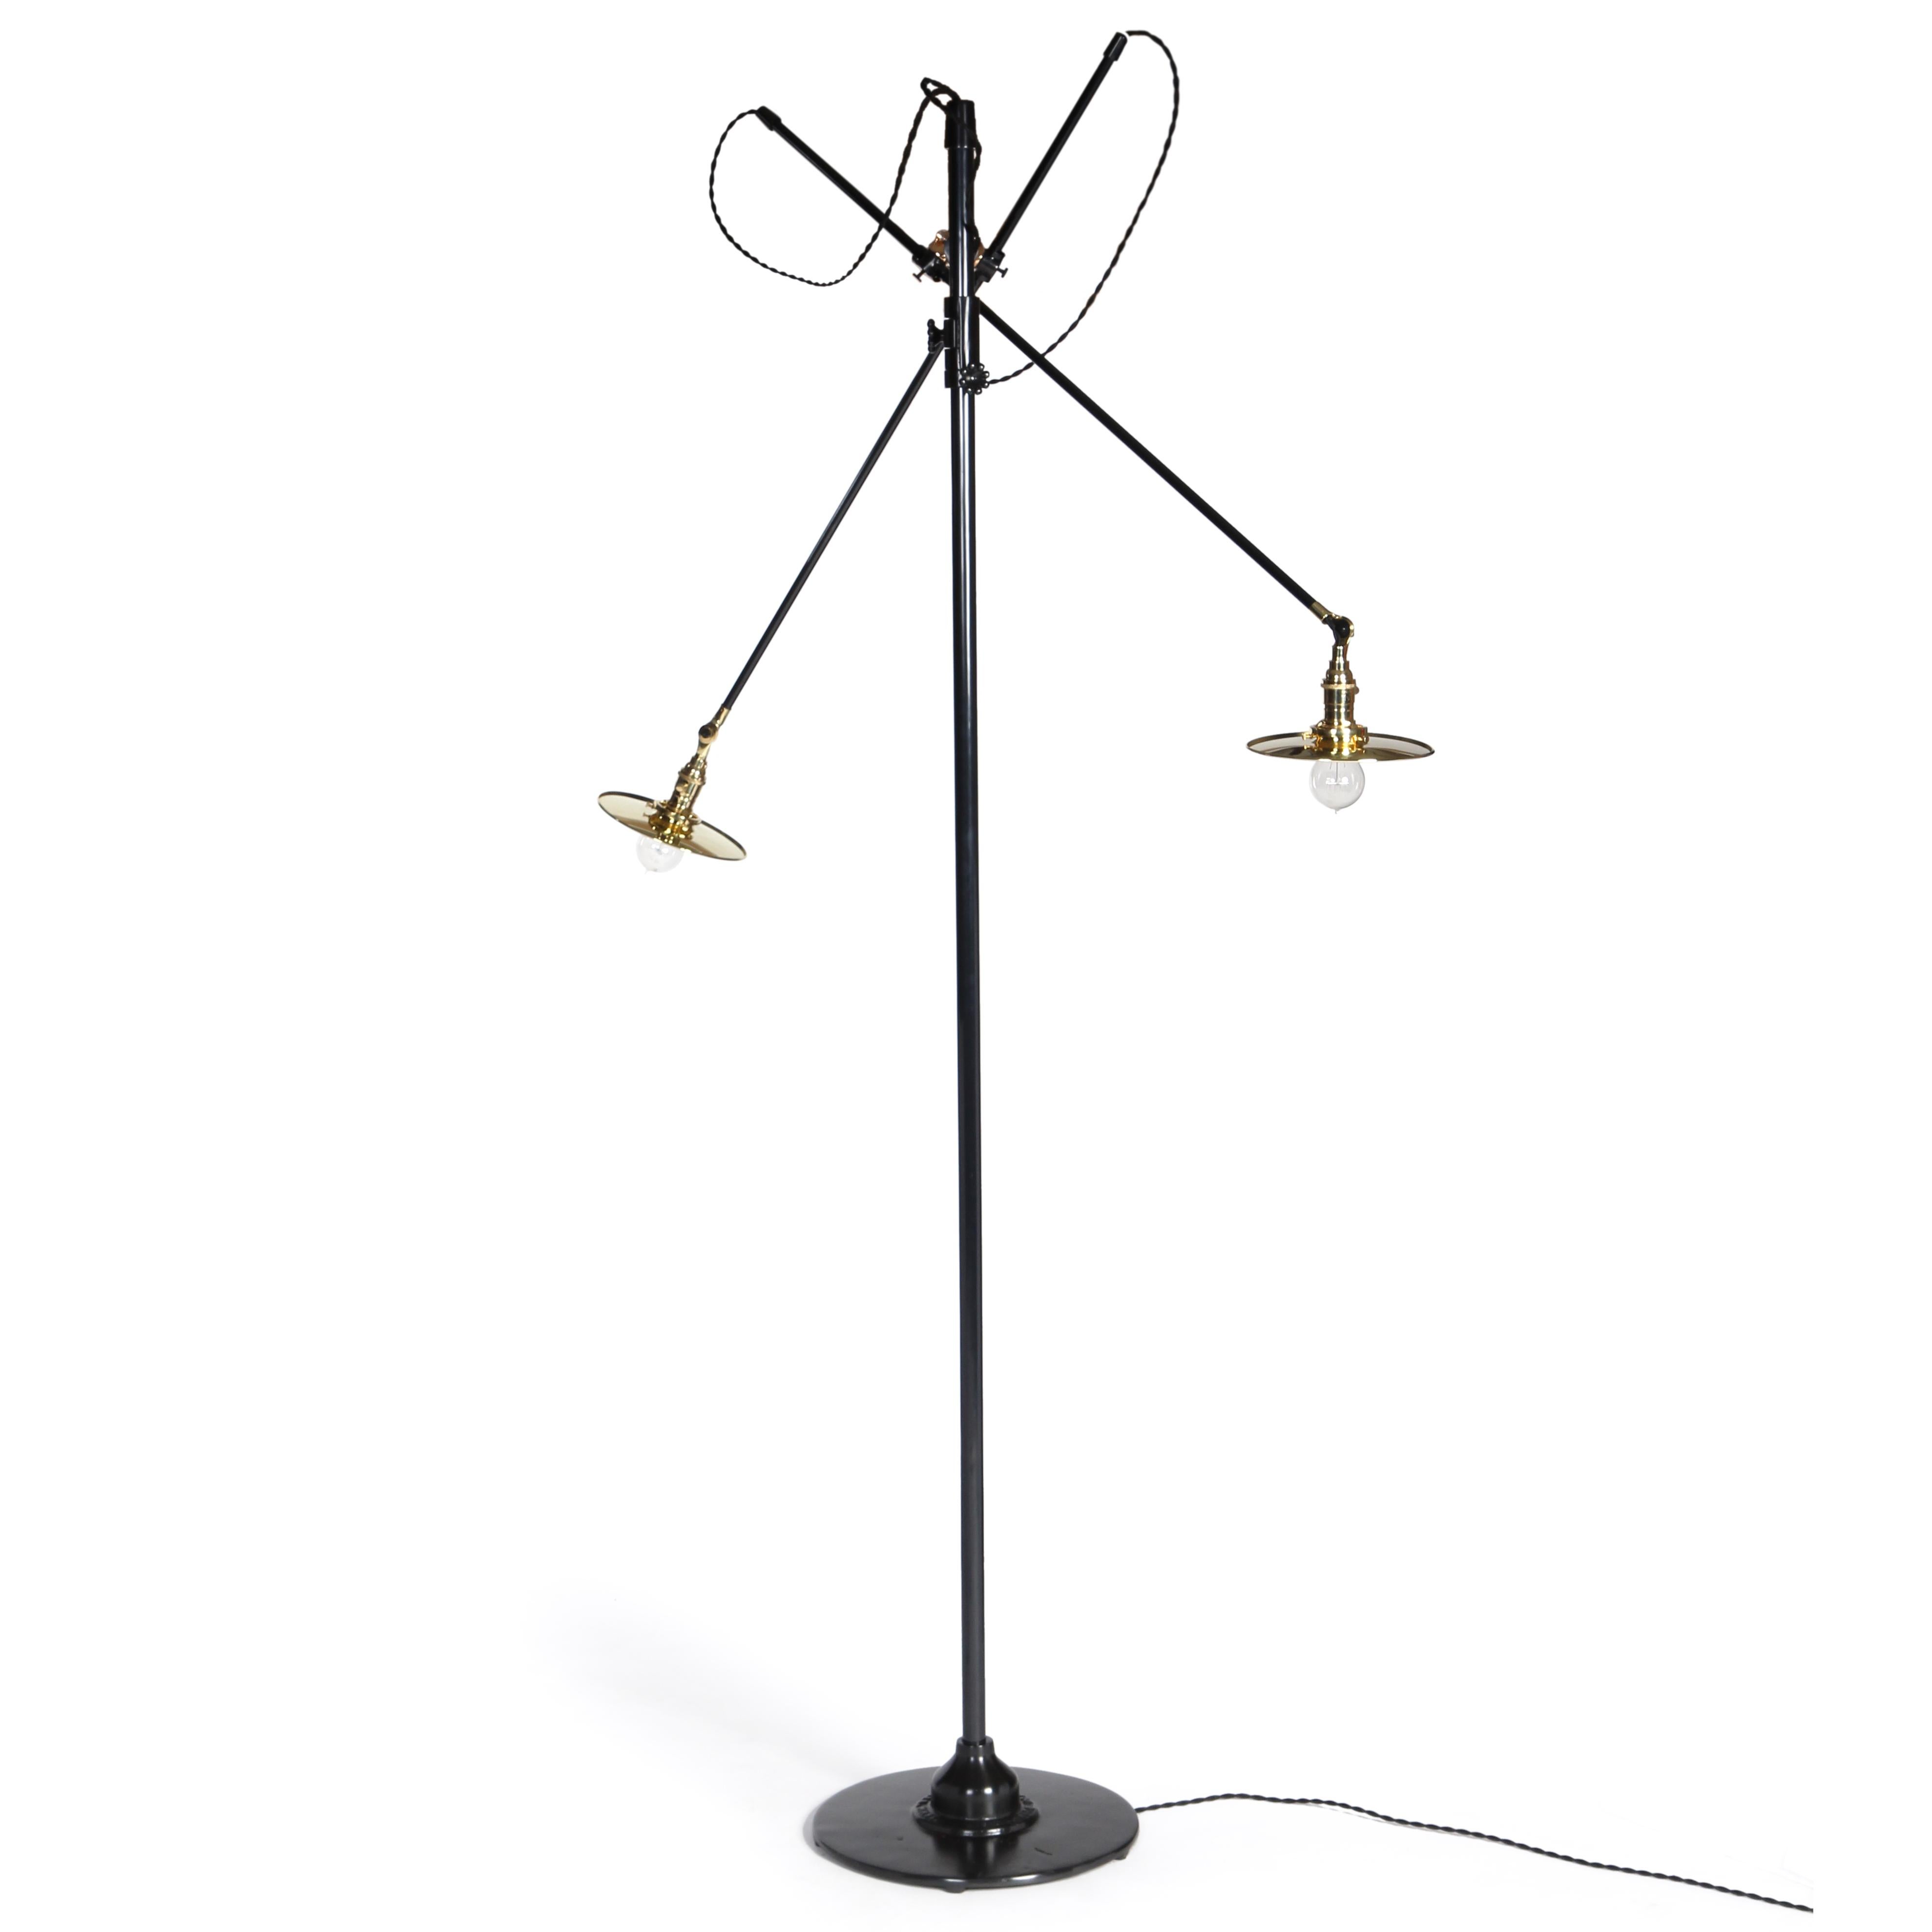 O.C. White designed adjustable floor lamp in patinated steel and polished brass flat shades. Two articulating arms mounted to one adjustable arm. Supported by a stepped disc base. Manufactured in the USA, customized by the WYETH Workshop in NY.